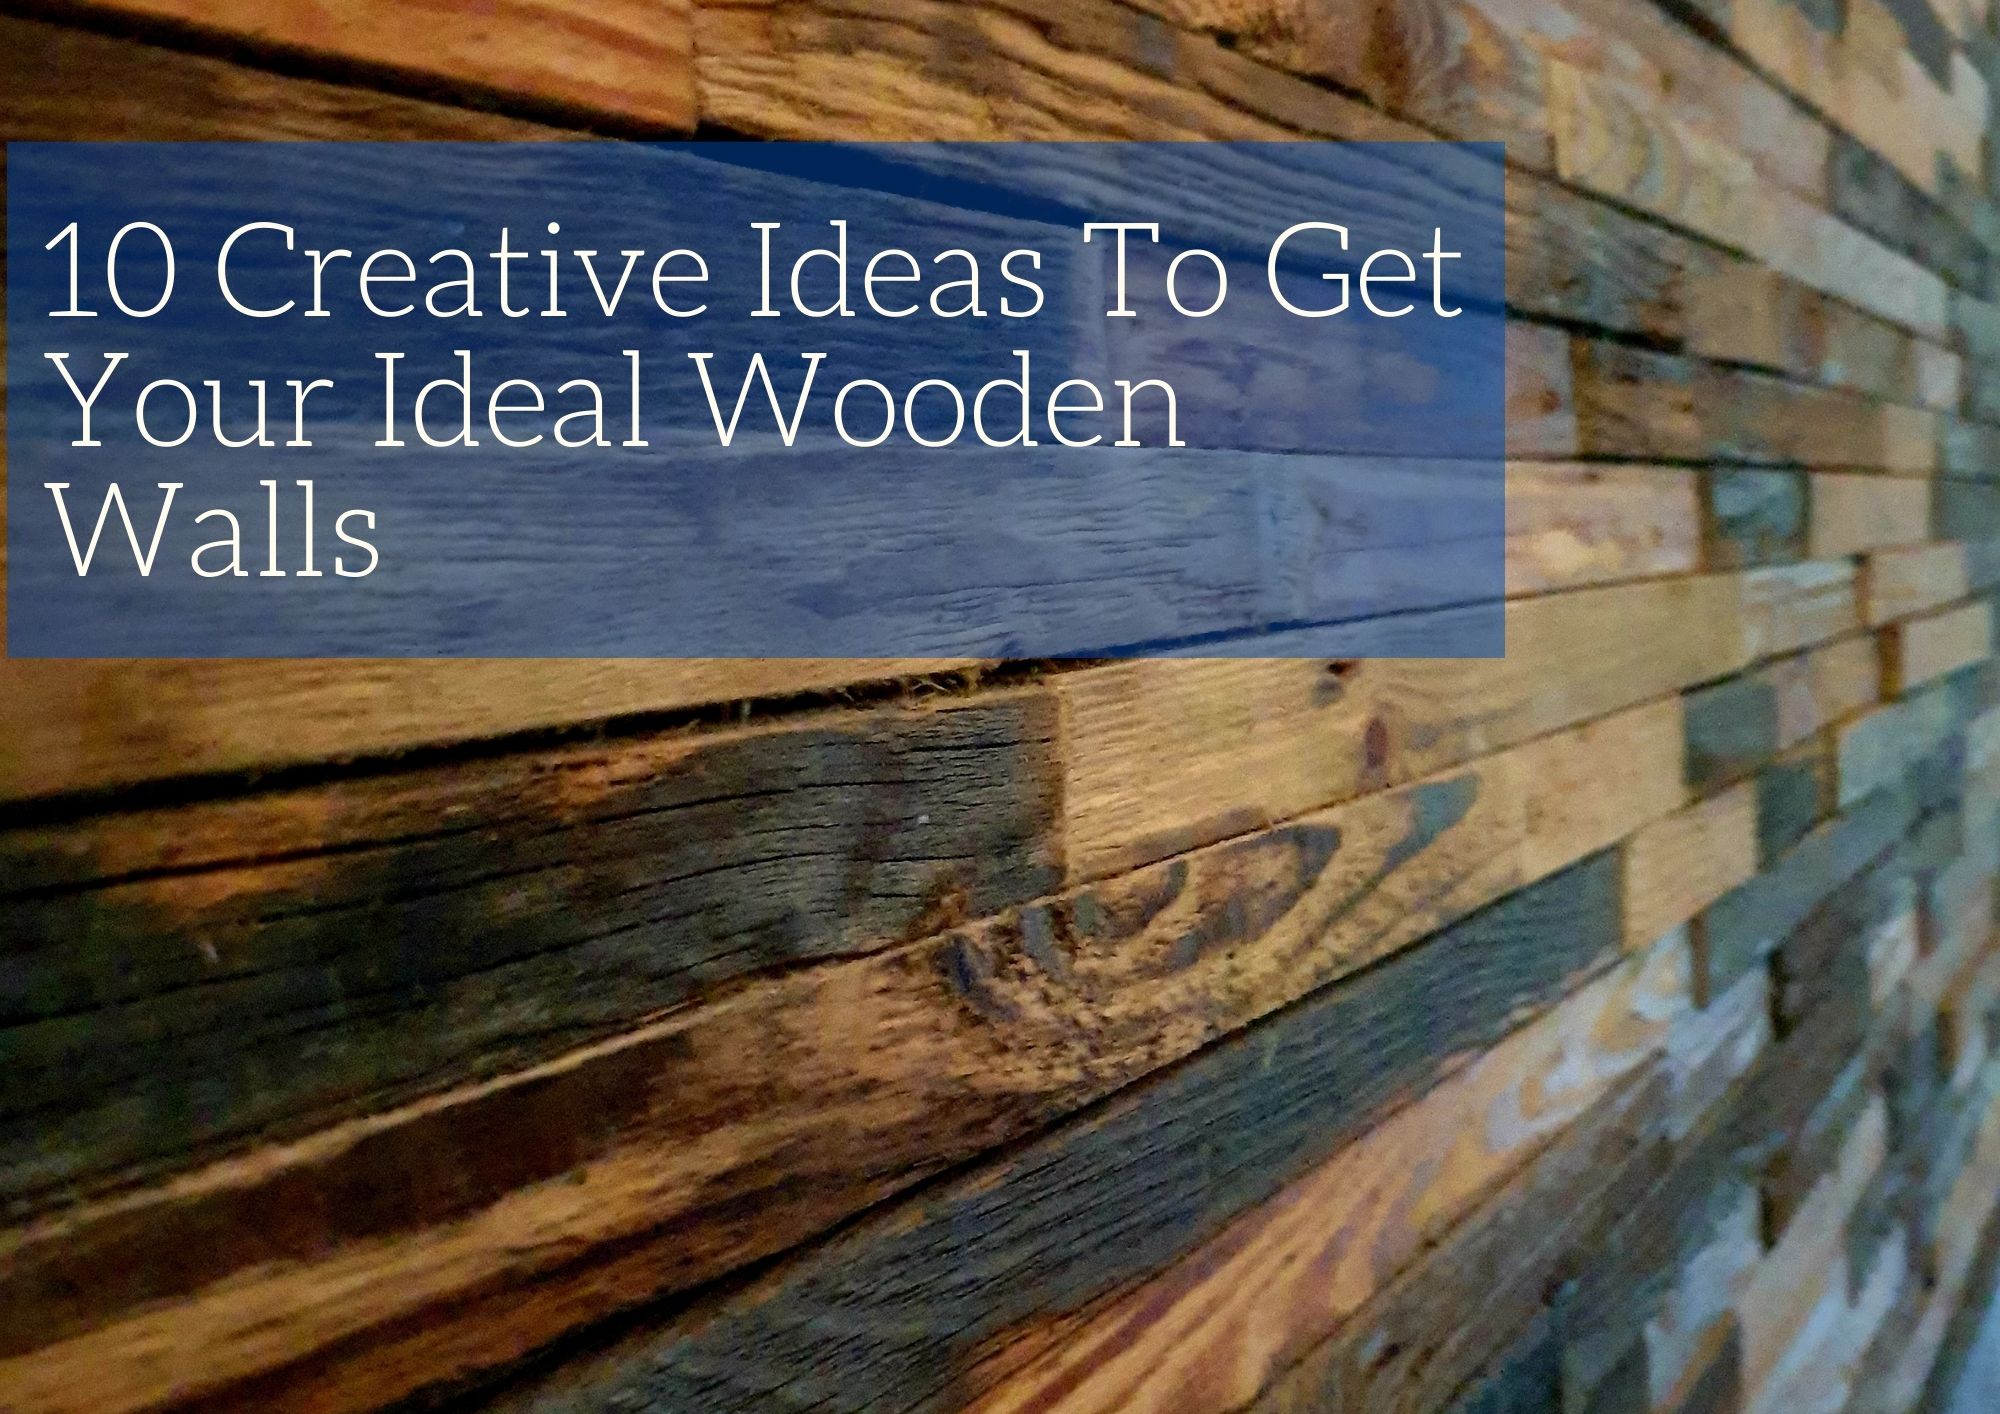 10 Creative Ideas To Get Your Ideal Wooden Walls